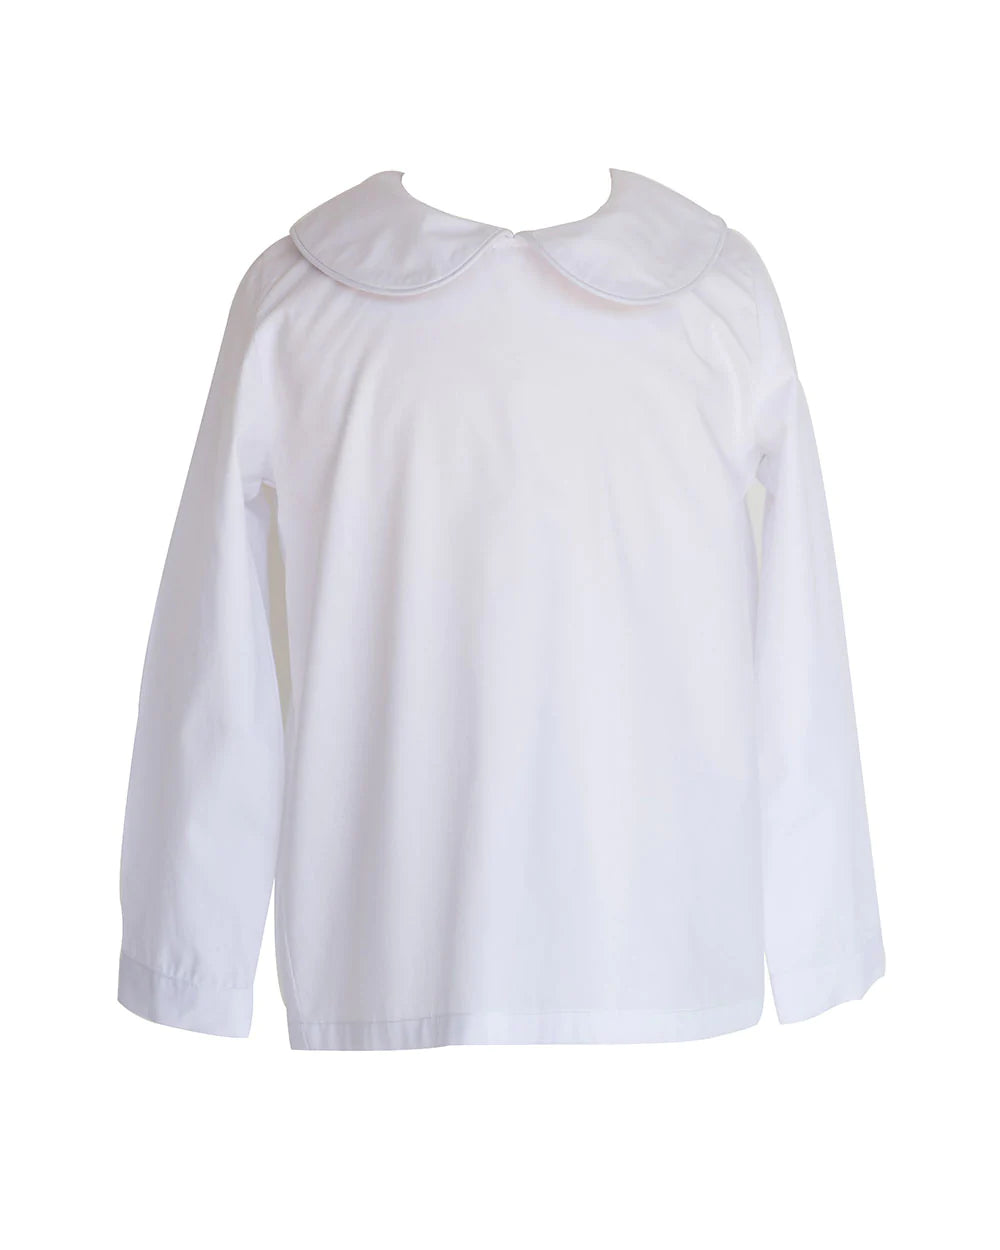 Long Sleeve Piped Peter Pan Collar Shirt in White  - Doodlebug's Children's Boutique